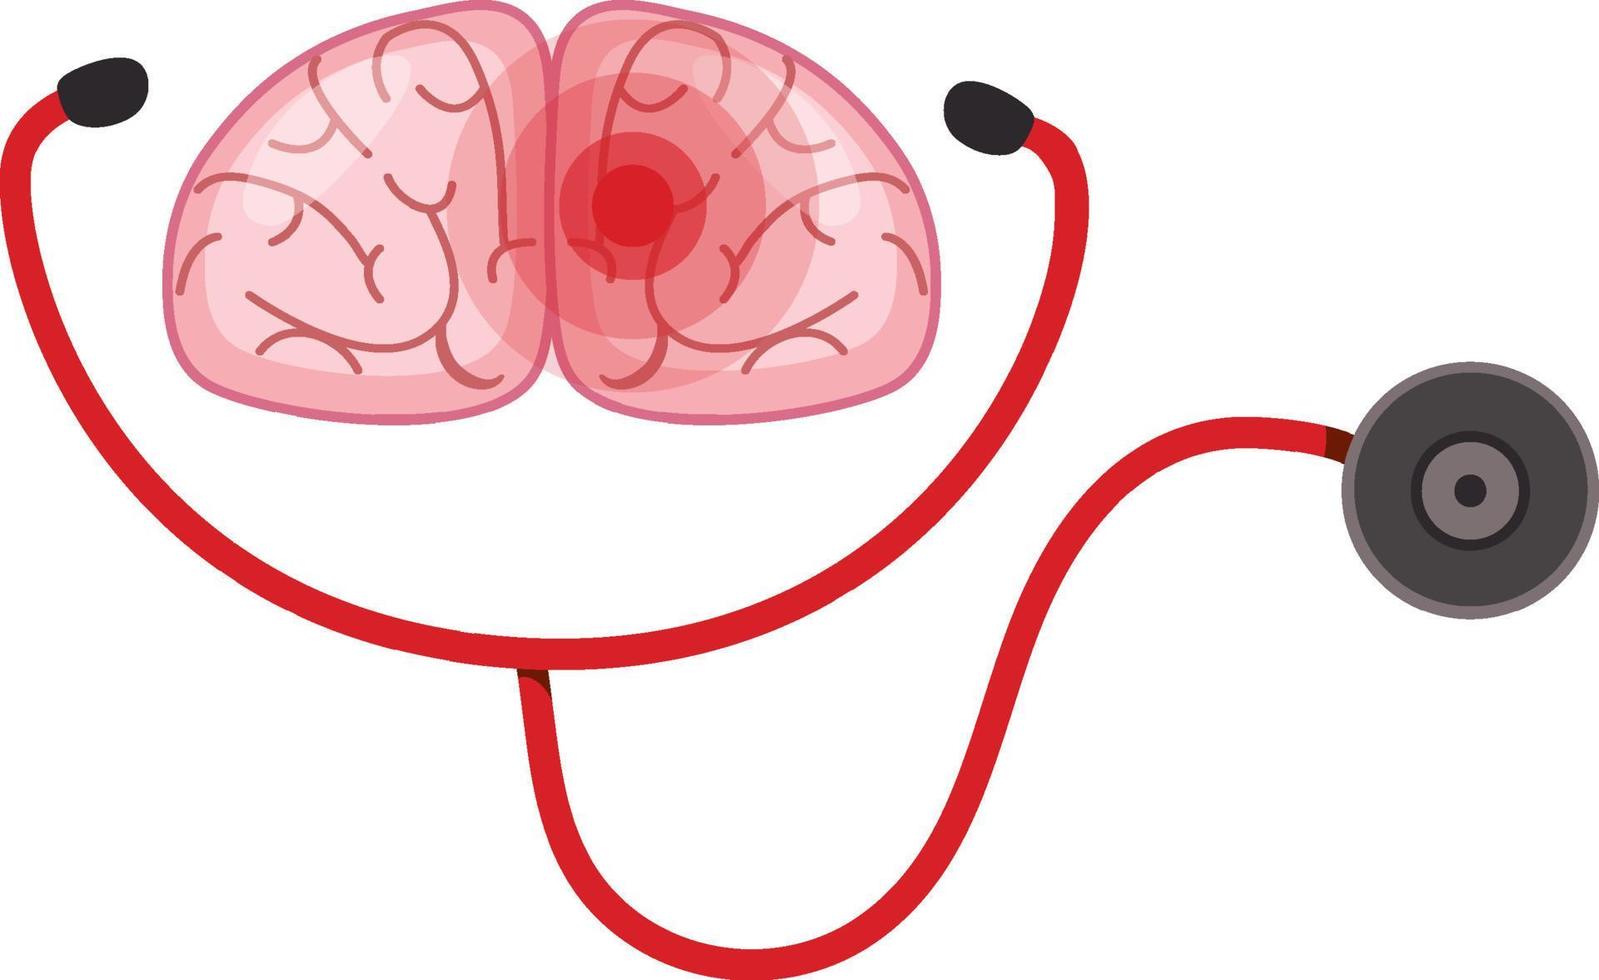 Stethoscope and brain on white background vector